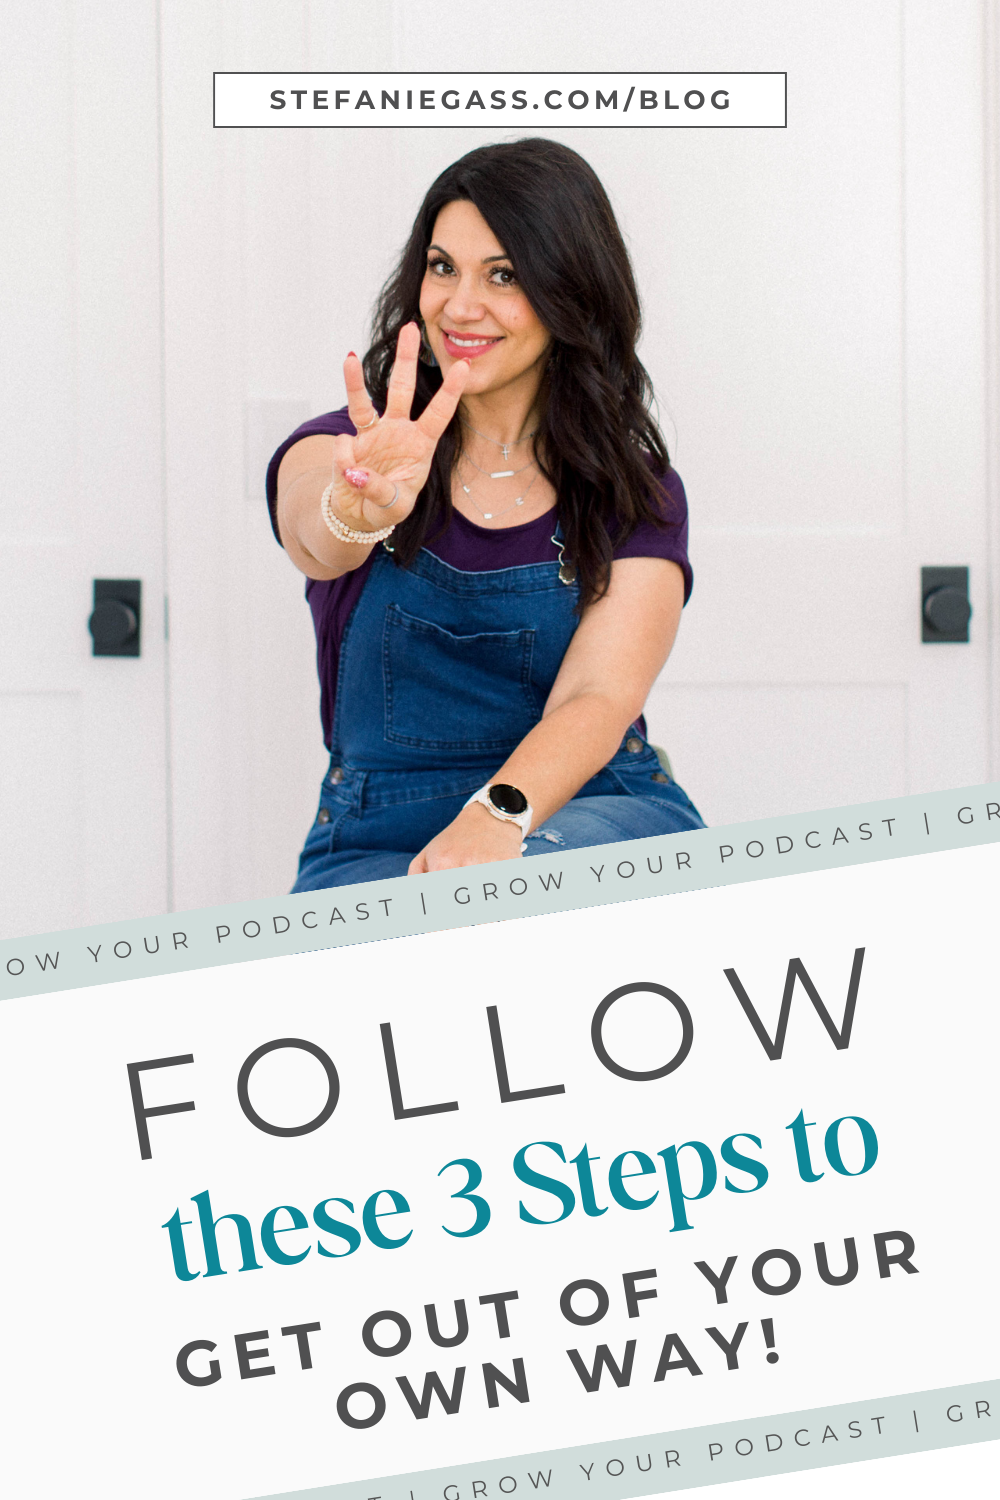 Brown haired woman holding up 3 fingers, wearing overalls and black t-shirt. Text says Follow these 3 steps to get out of your own way.
